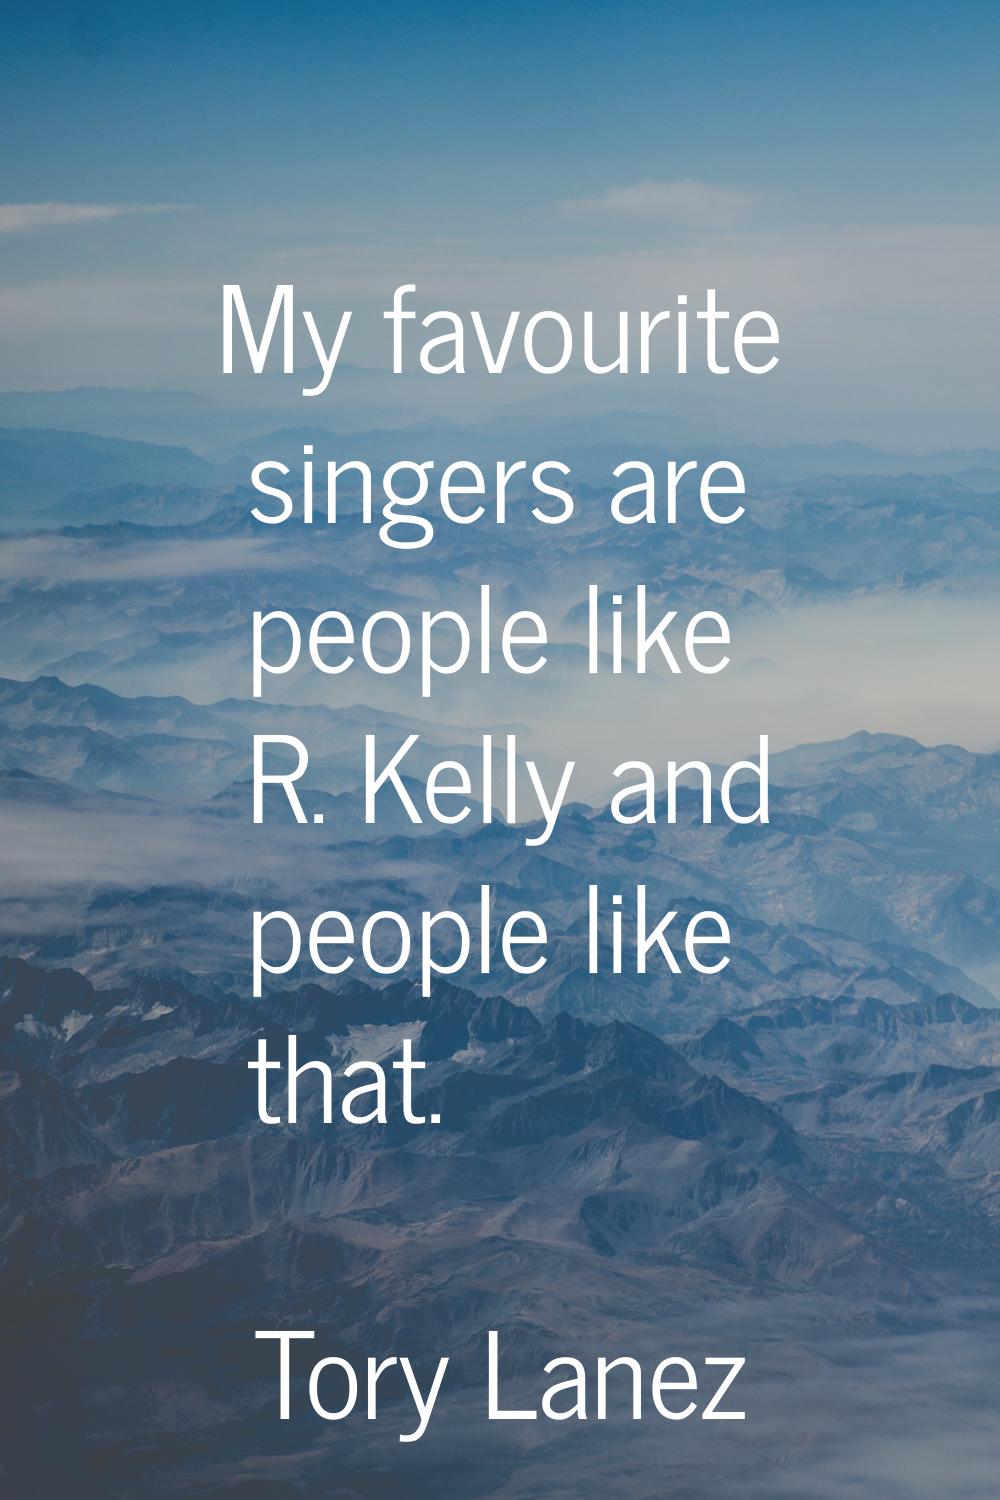 My favourite singers are people like R. Kelly and people like that.